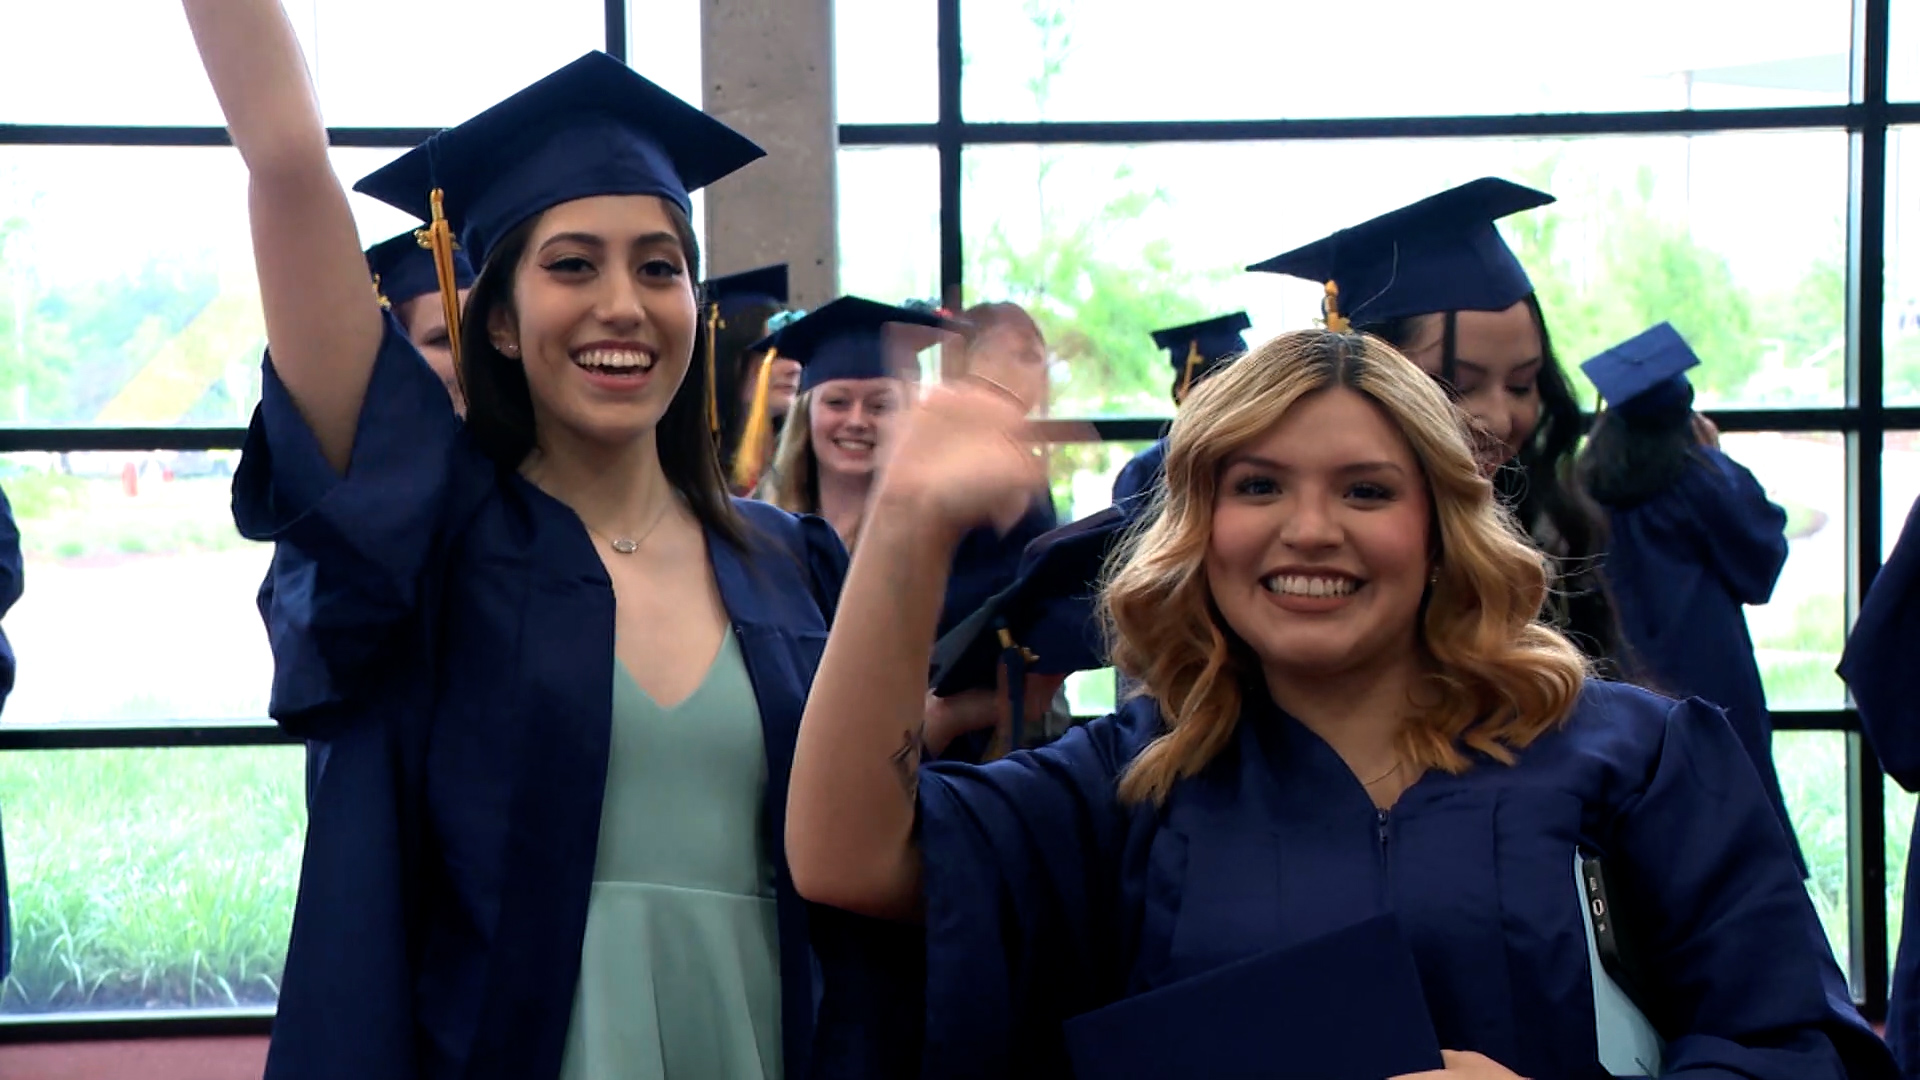 Two graduates in caps and gowns waving at the camera.